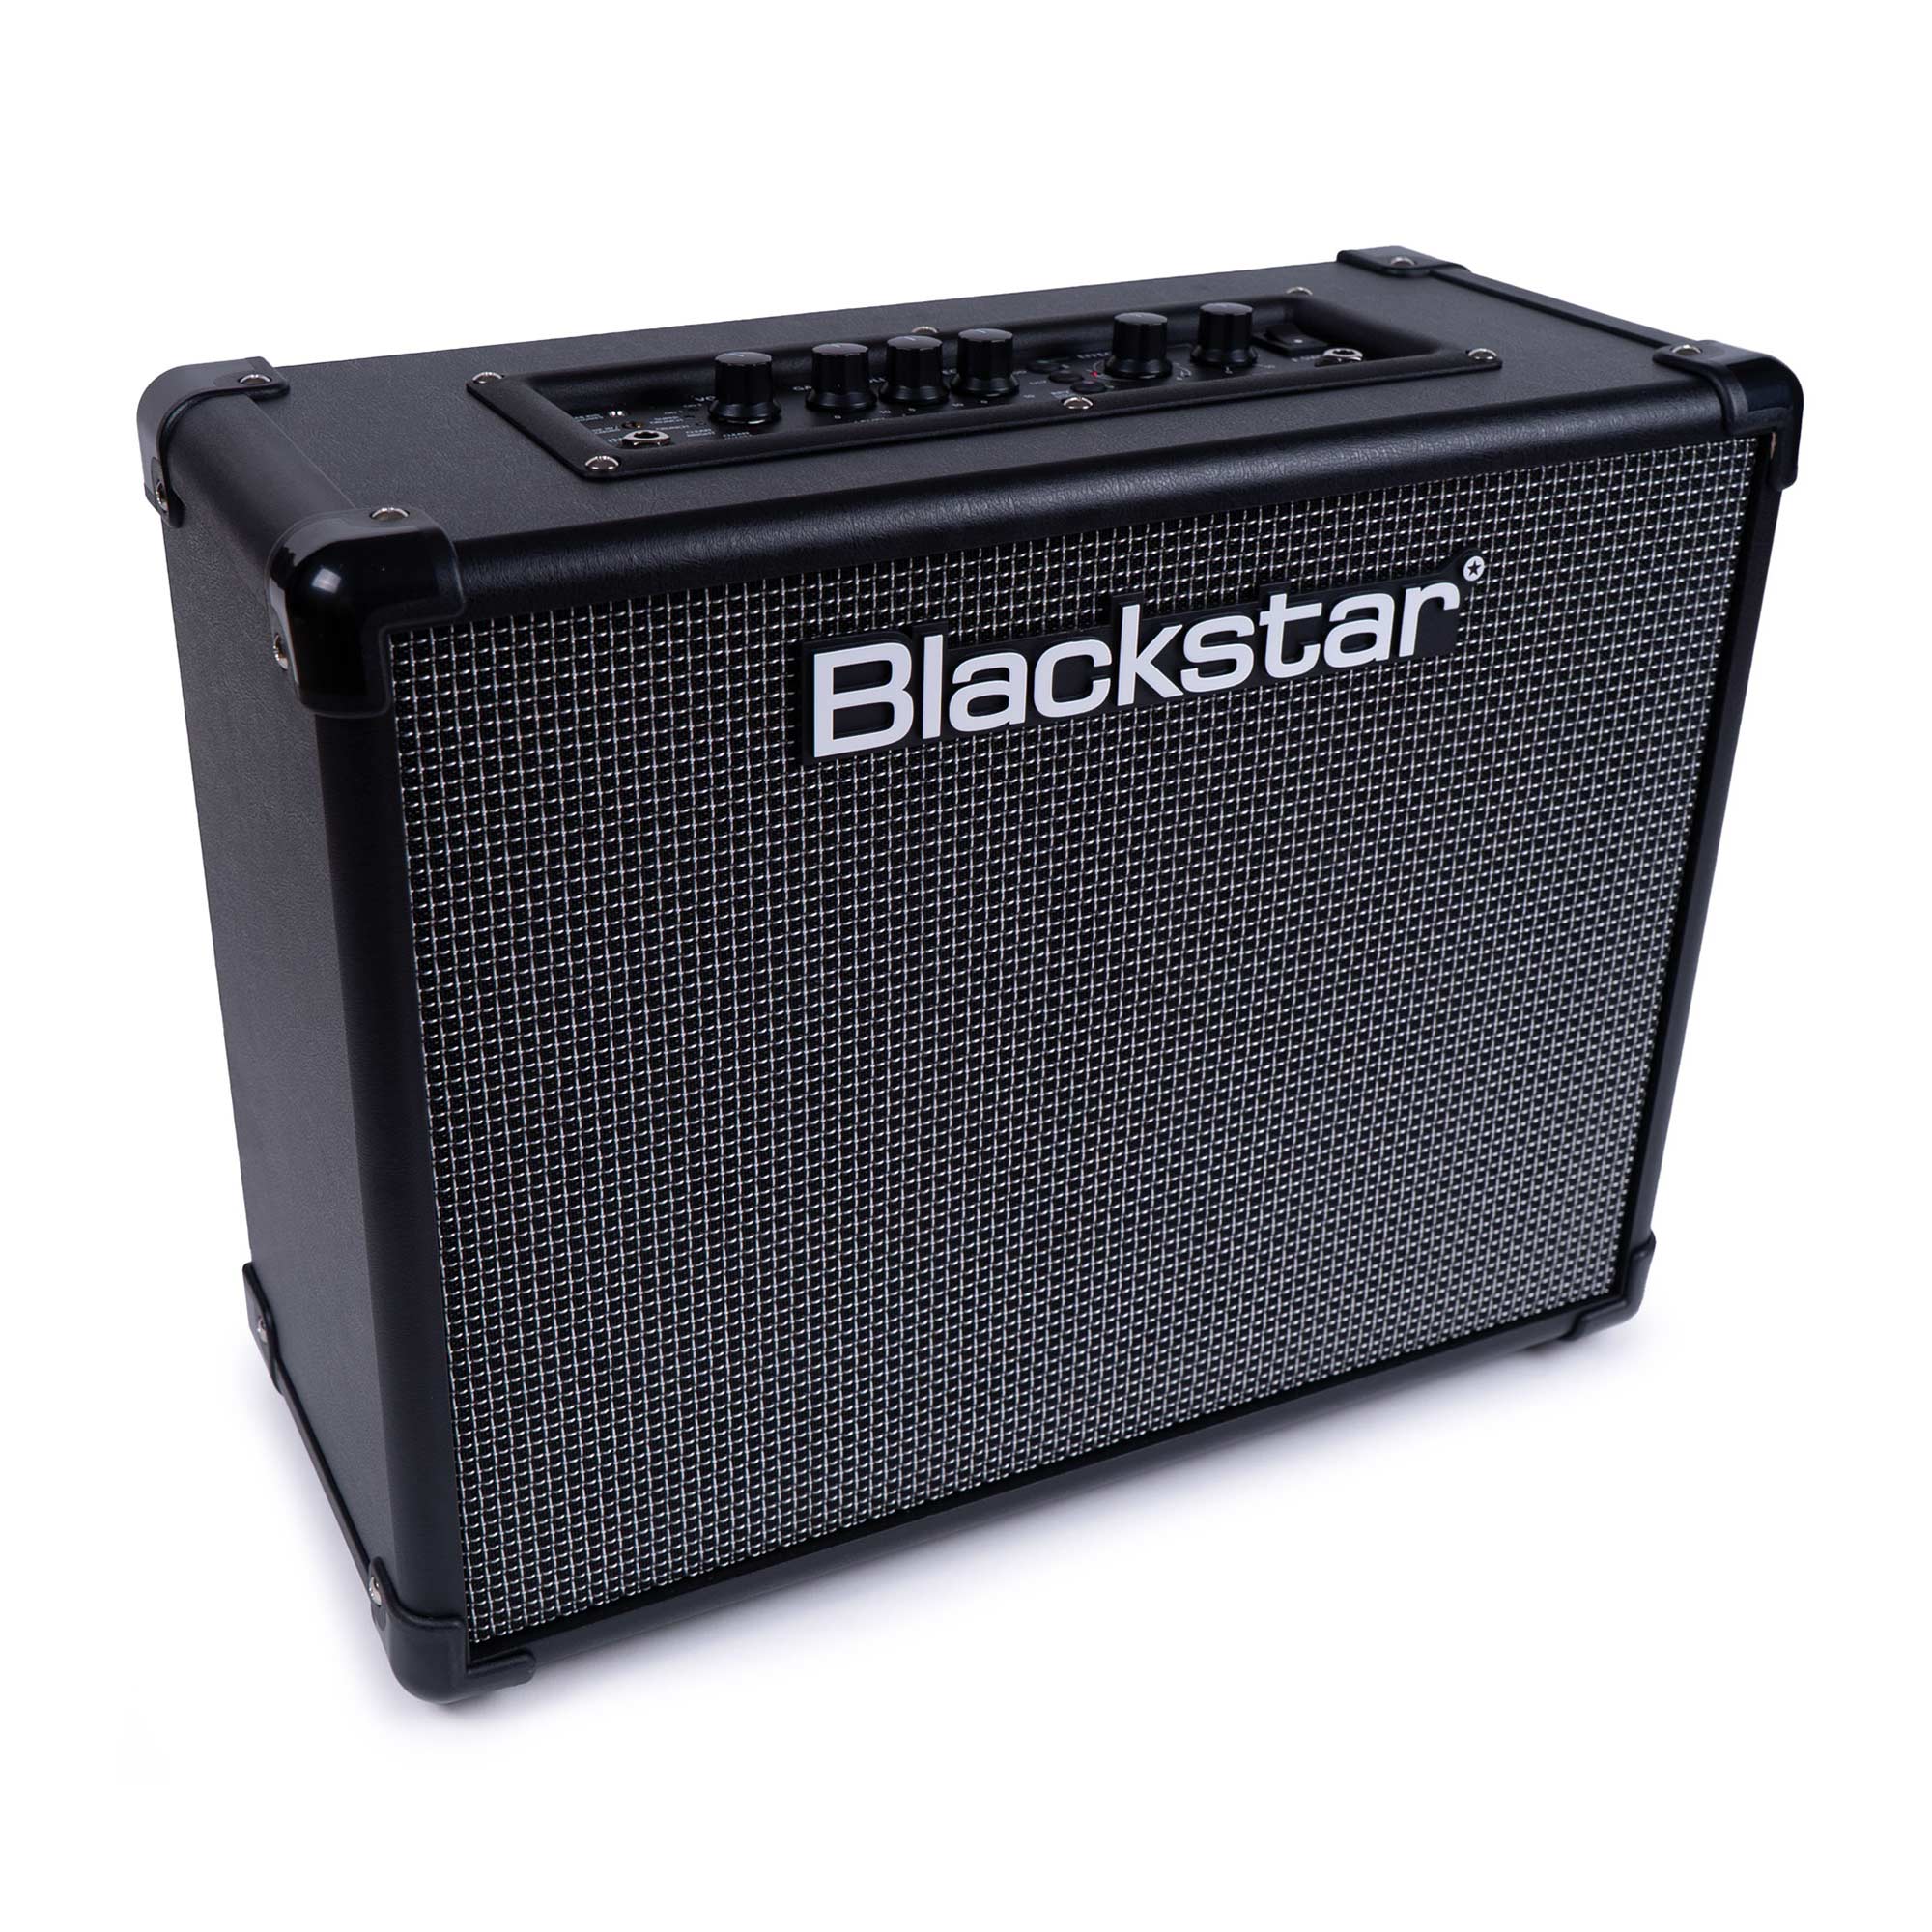 Blackstar IDCORE40v3 Stereo Electric Guitar Combo Amp with 2 x 6.5